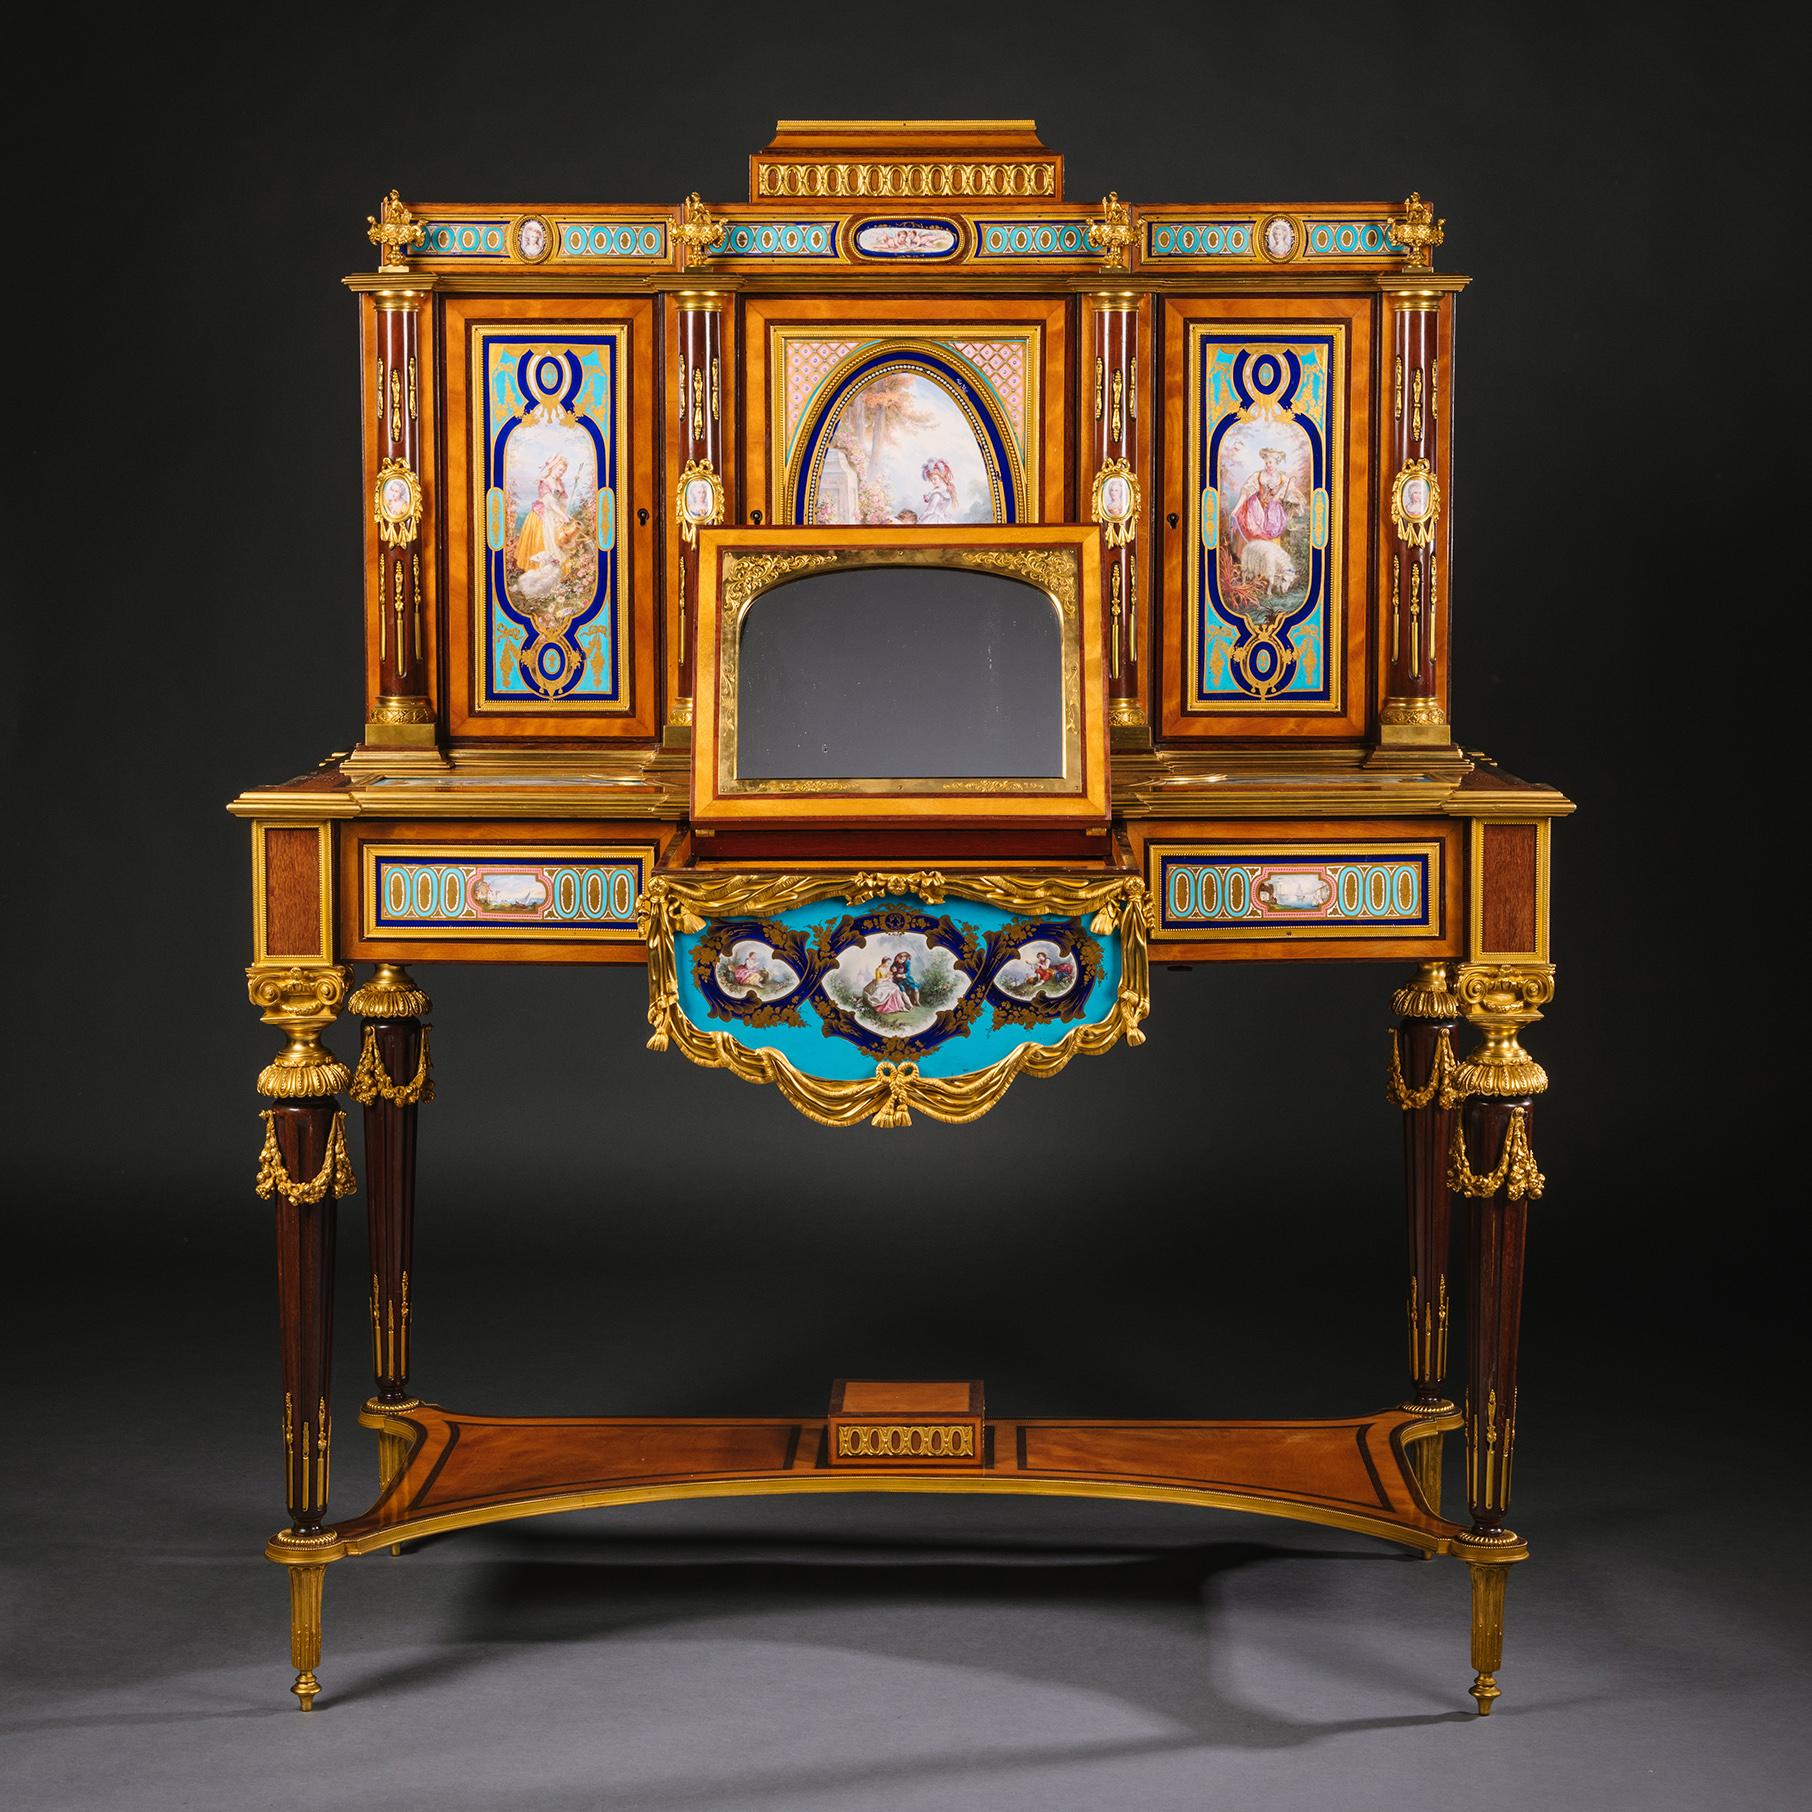 A Napoléon III Gilt-Bronze and Sèvres Style Porcelain-Mounted Bonheur Du Jour In Good Condition For Sale In Brighton, West Sussex